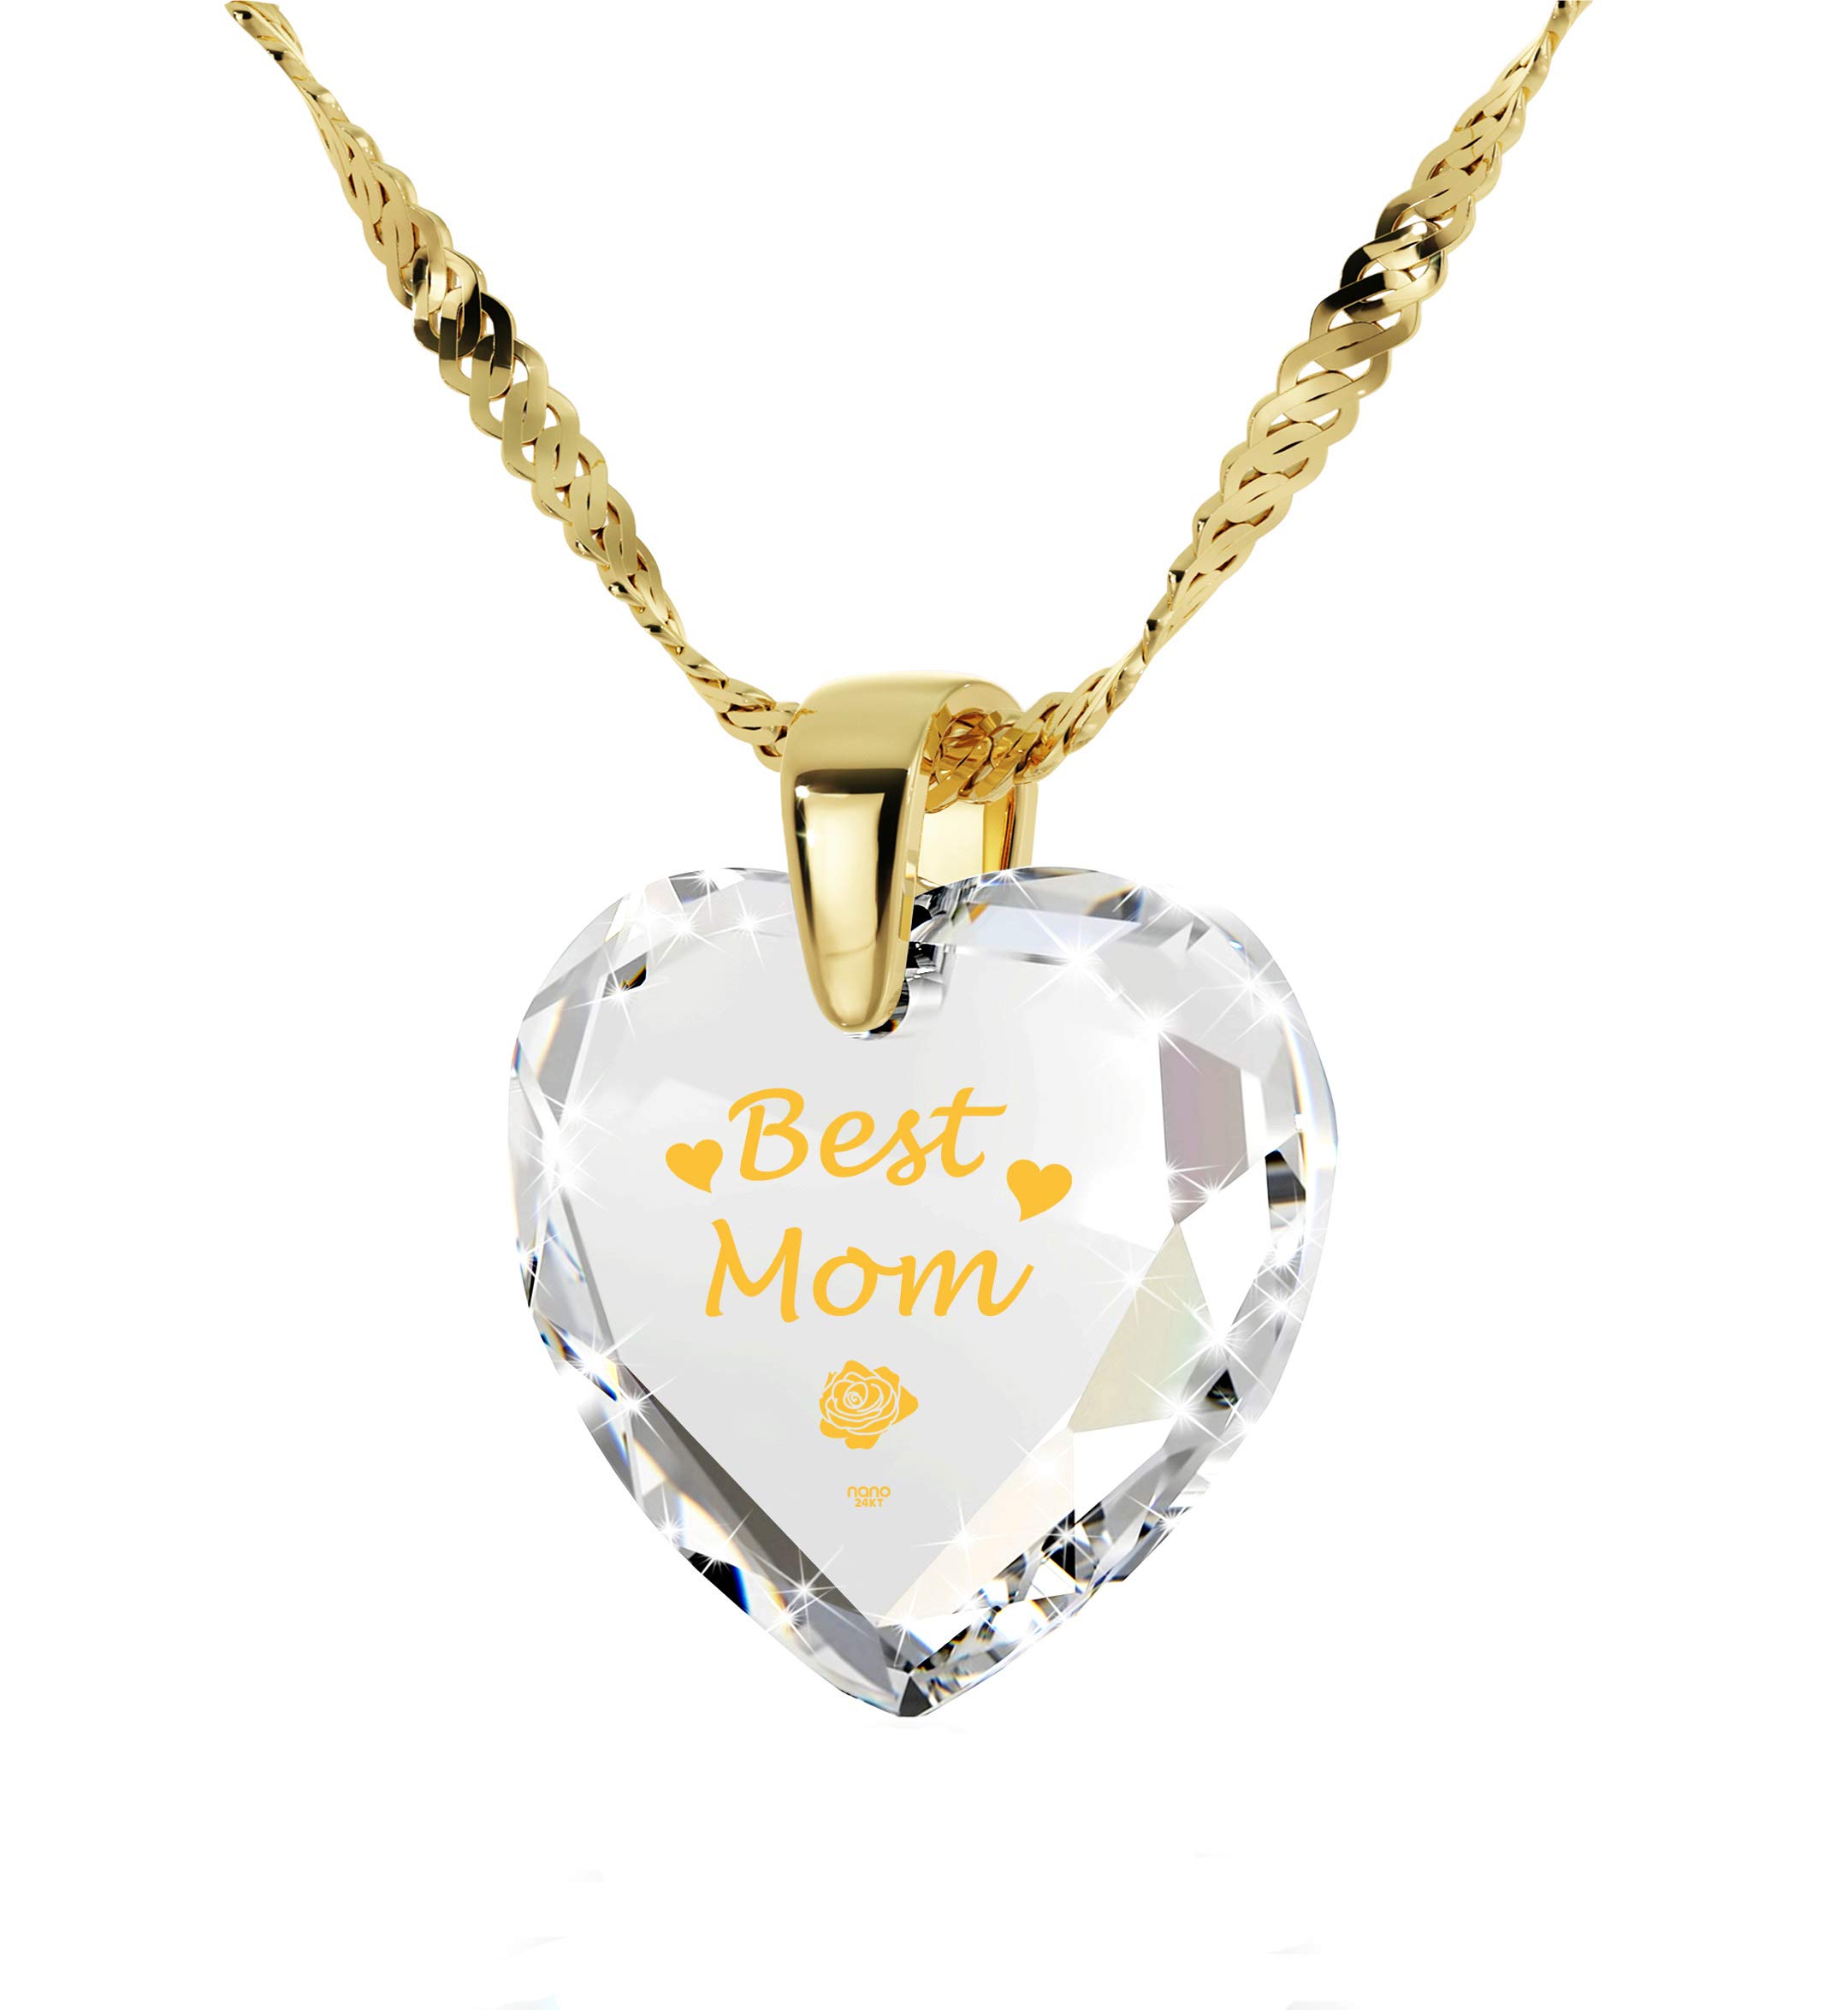 Gold Plated Best Mom Necklace - Heart Pendant Inscribed in 24k Gold on Cubic Zirconia, 18